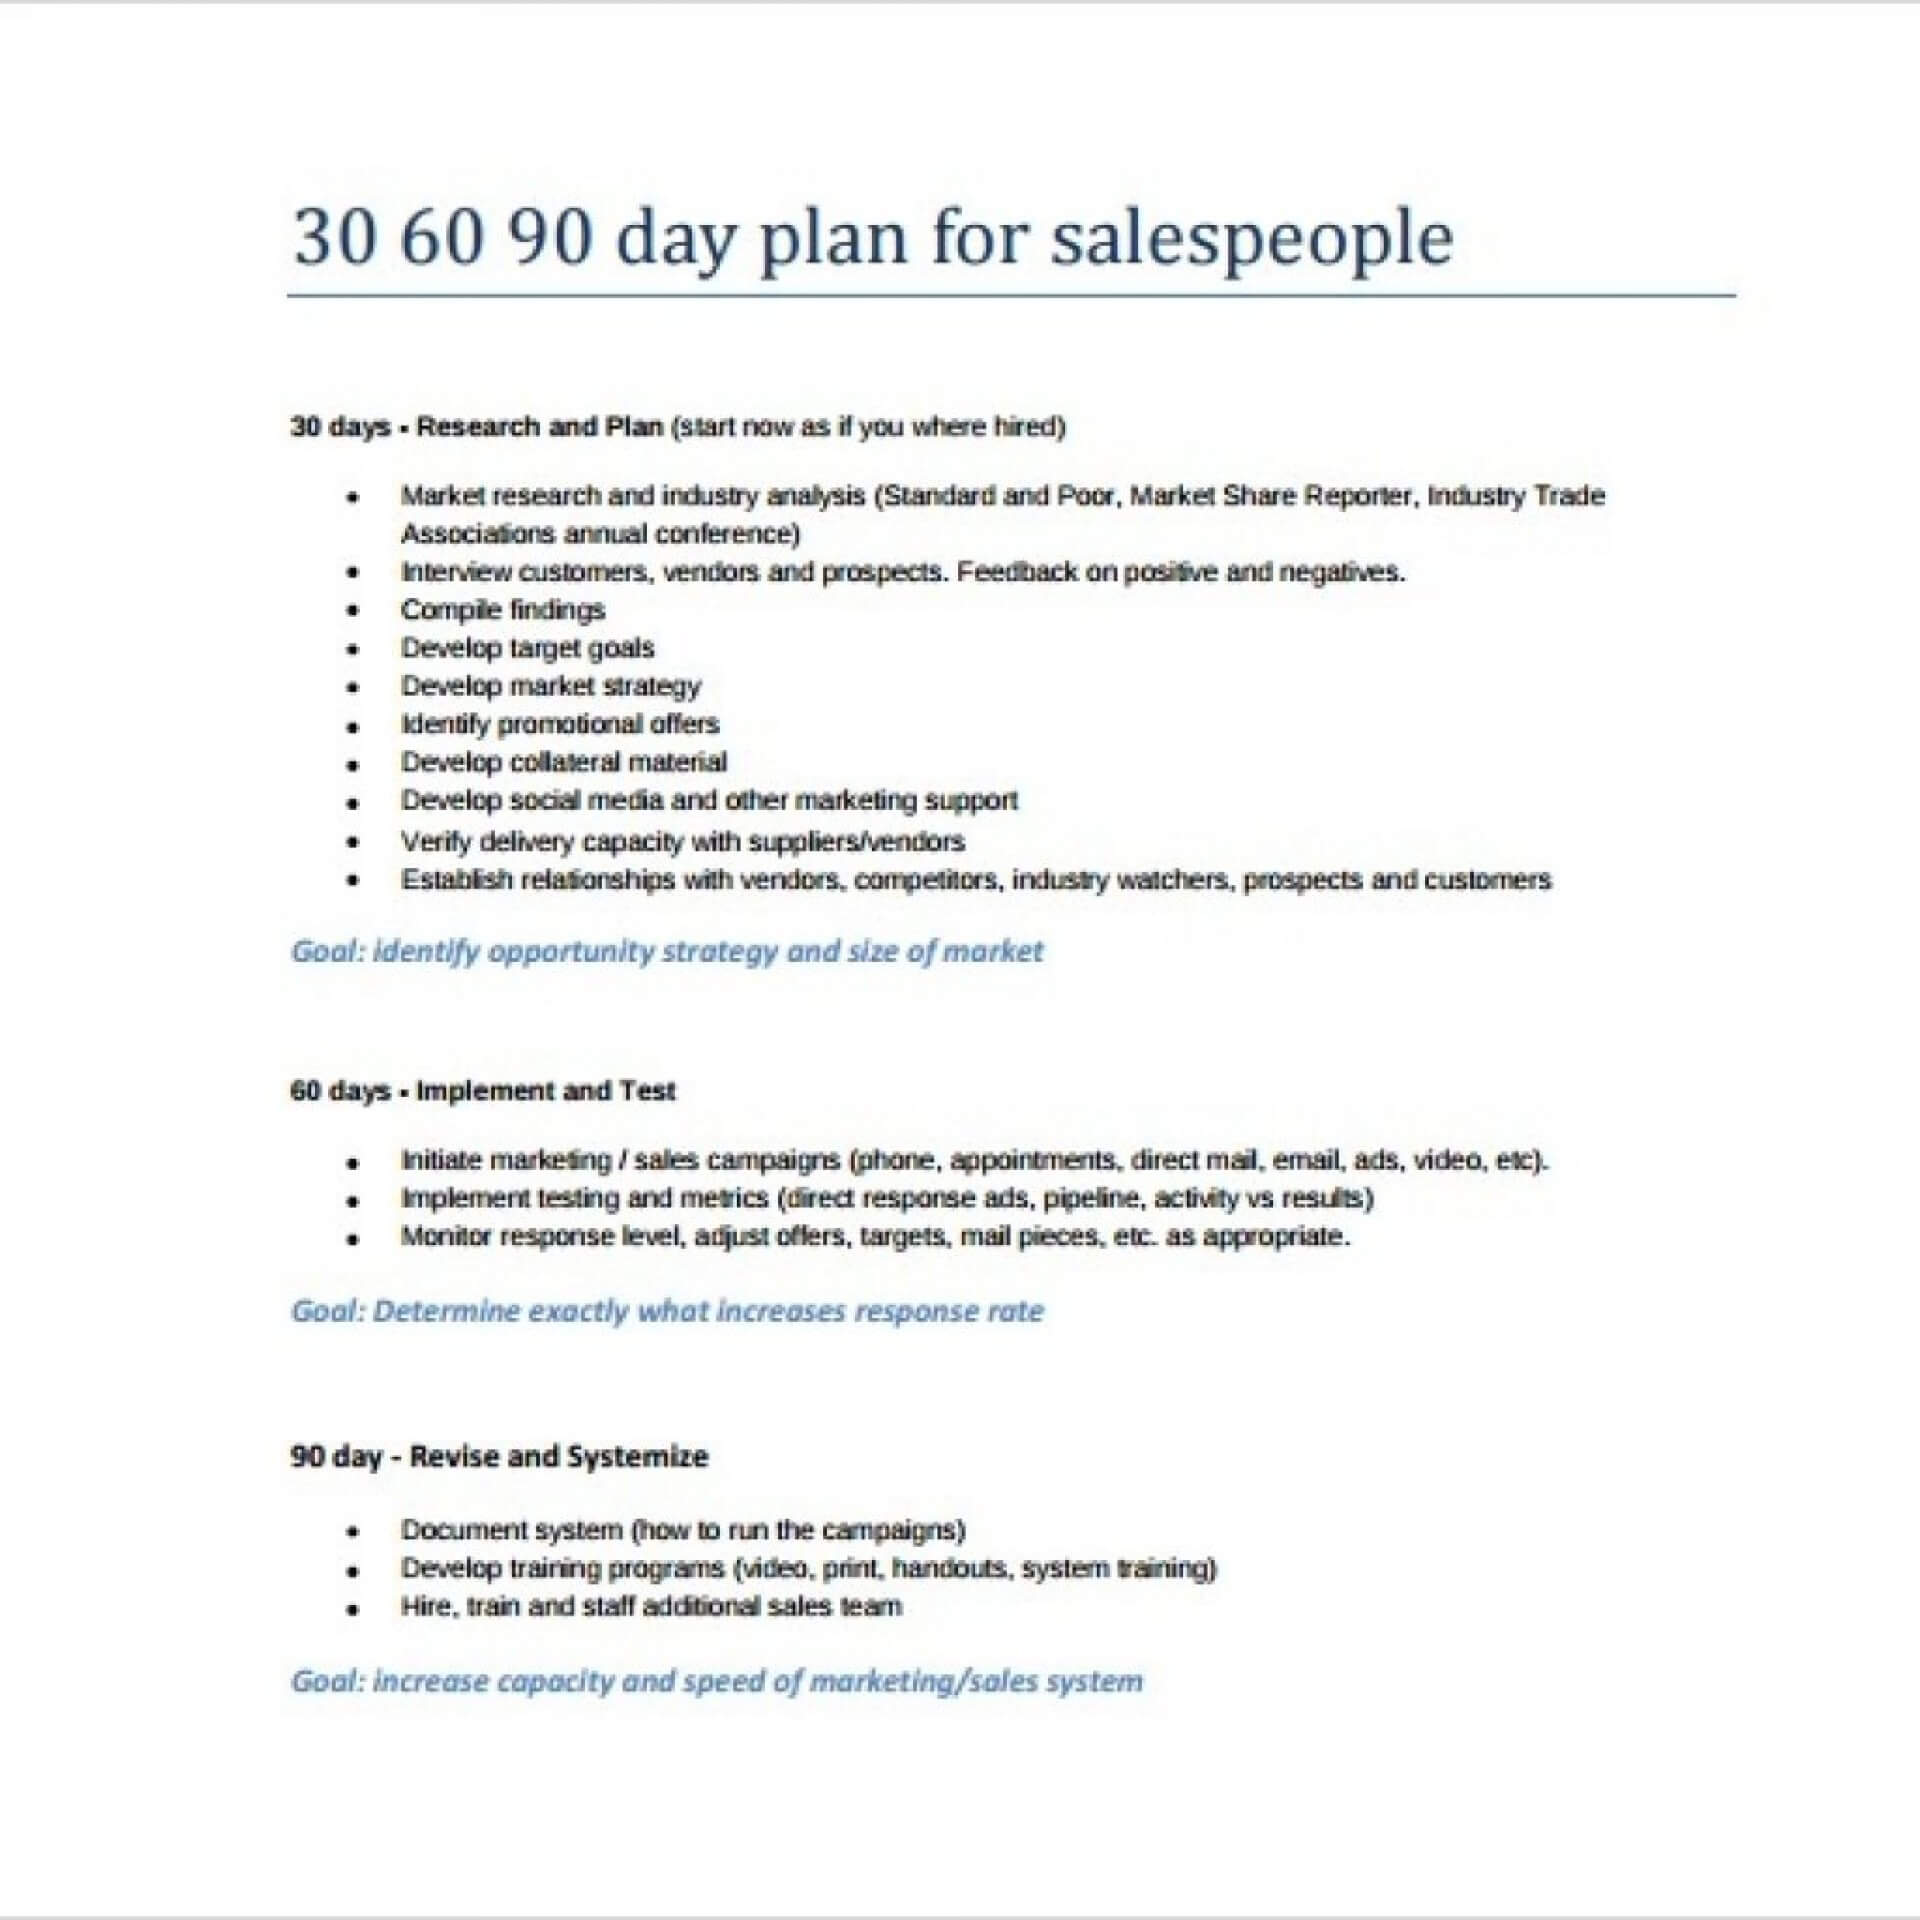 004 Marketing Plan Free Day Template Staggering 30 60 90 Vp Intended For 30 60 90 Day Plan Template Word